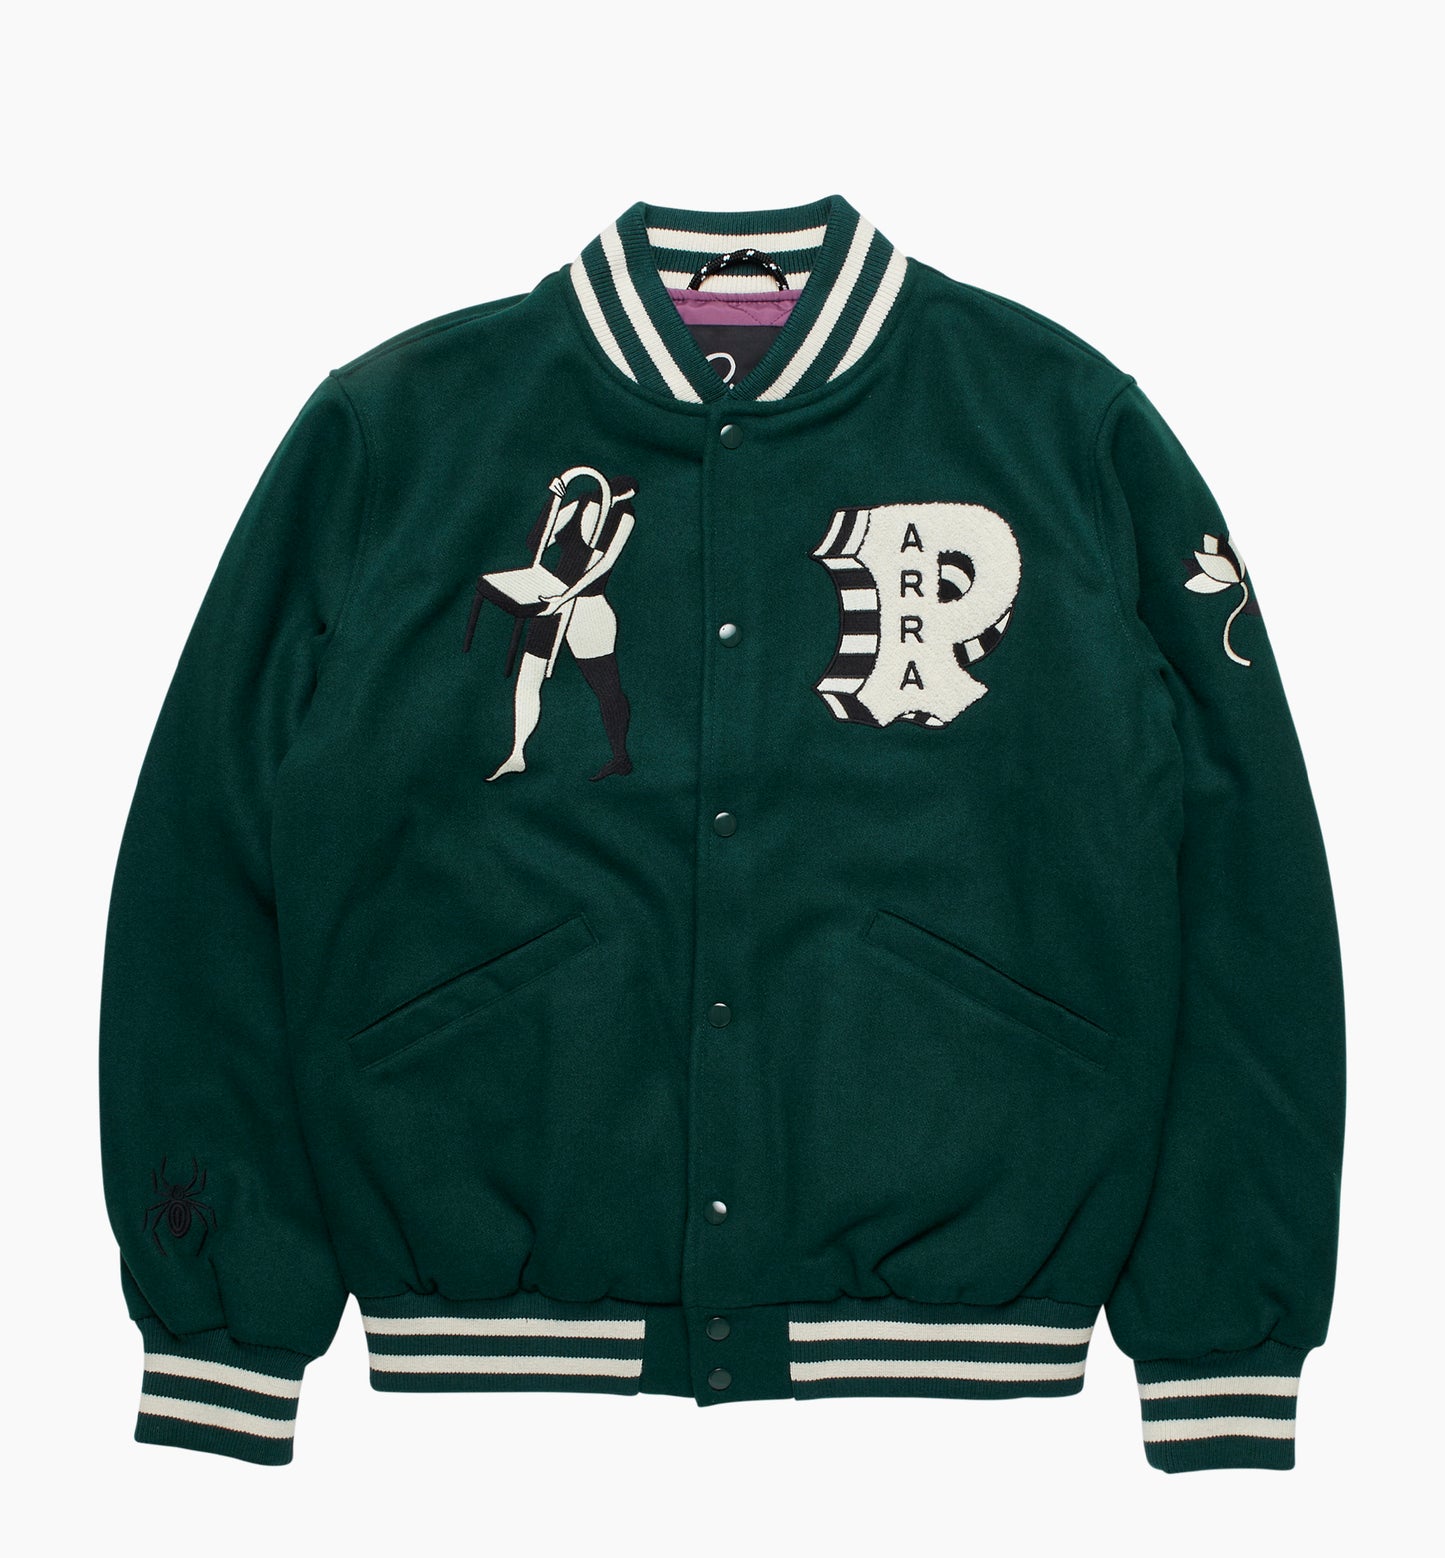 By Parra Cloudy Star Varsity Jacket Pine Green